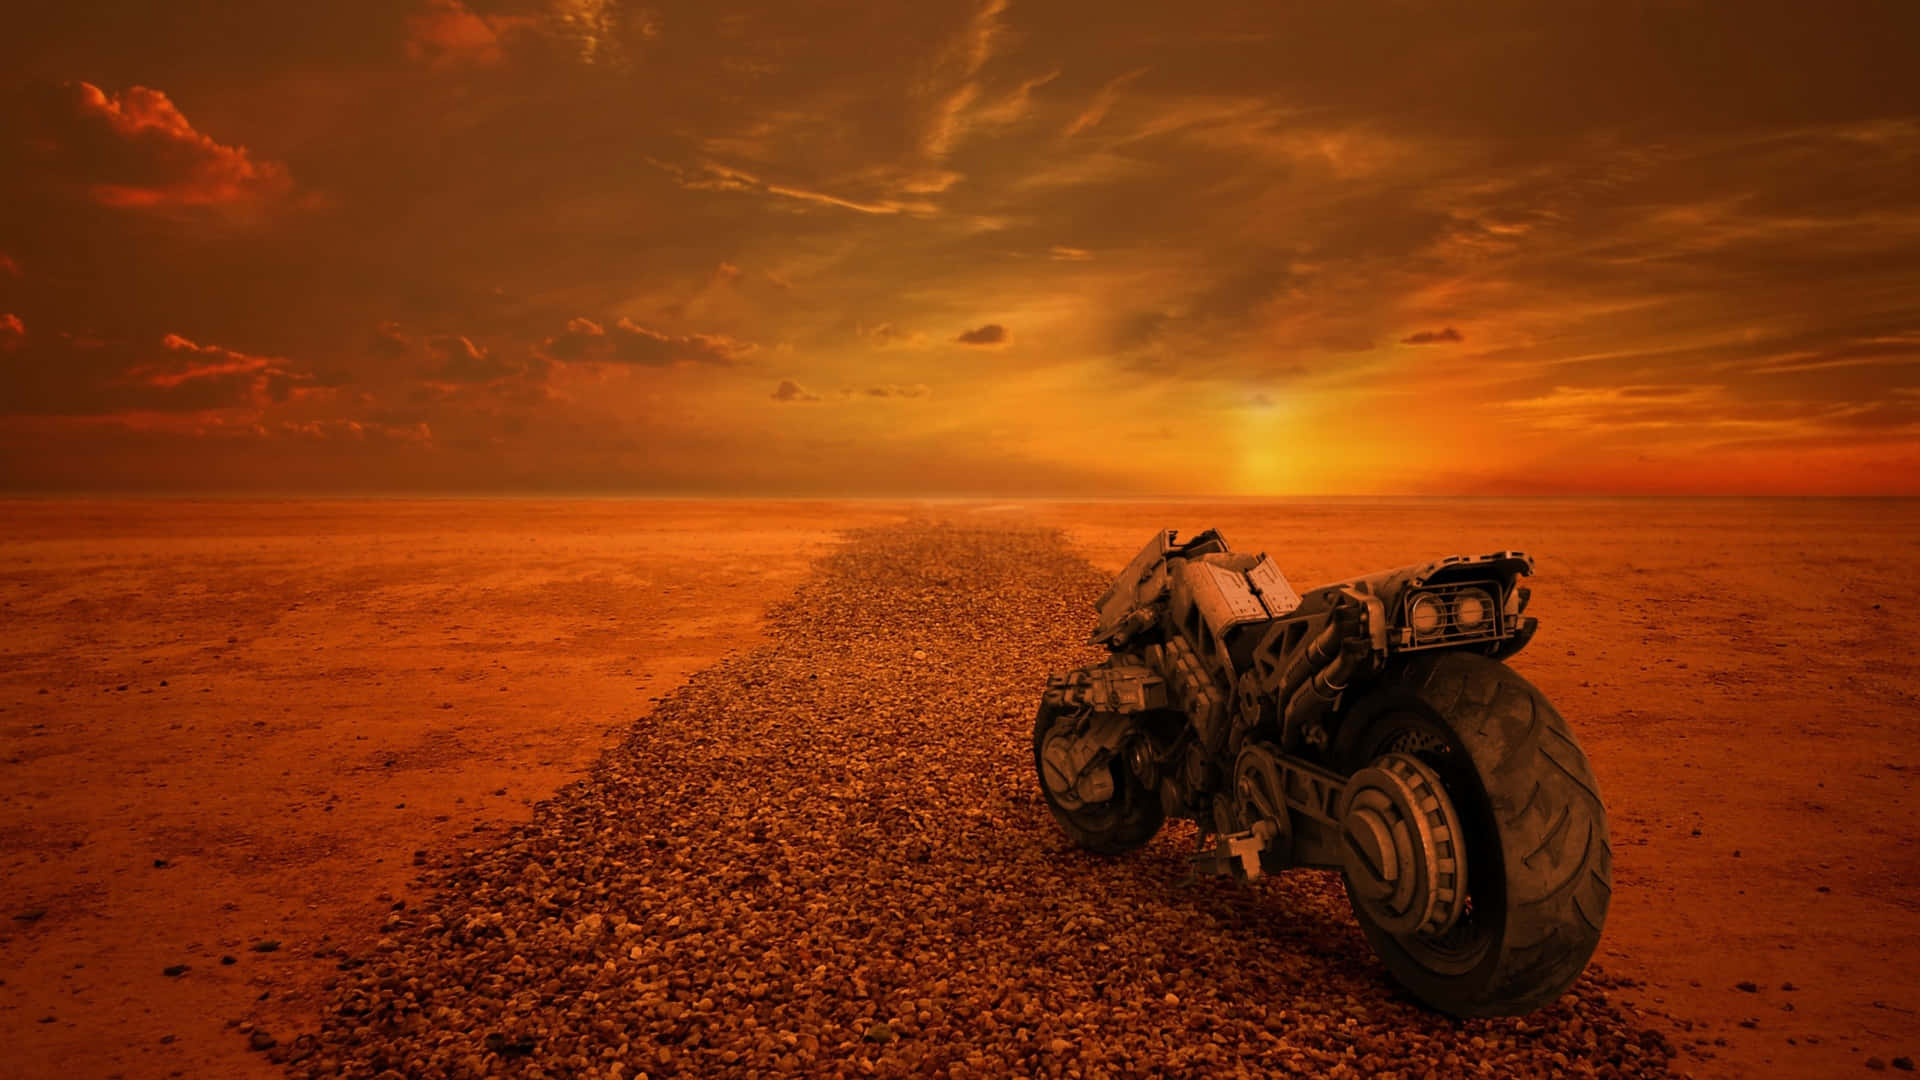 A Motorcycle Is Sitting On A Dirt Road In The Desert